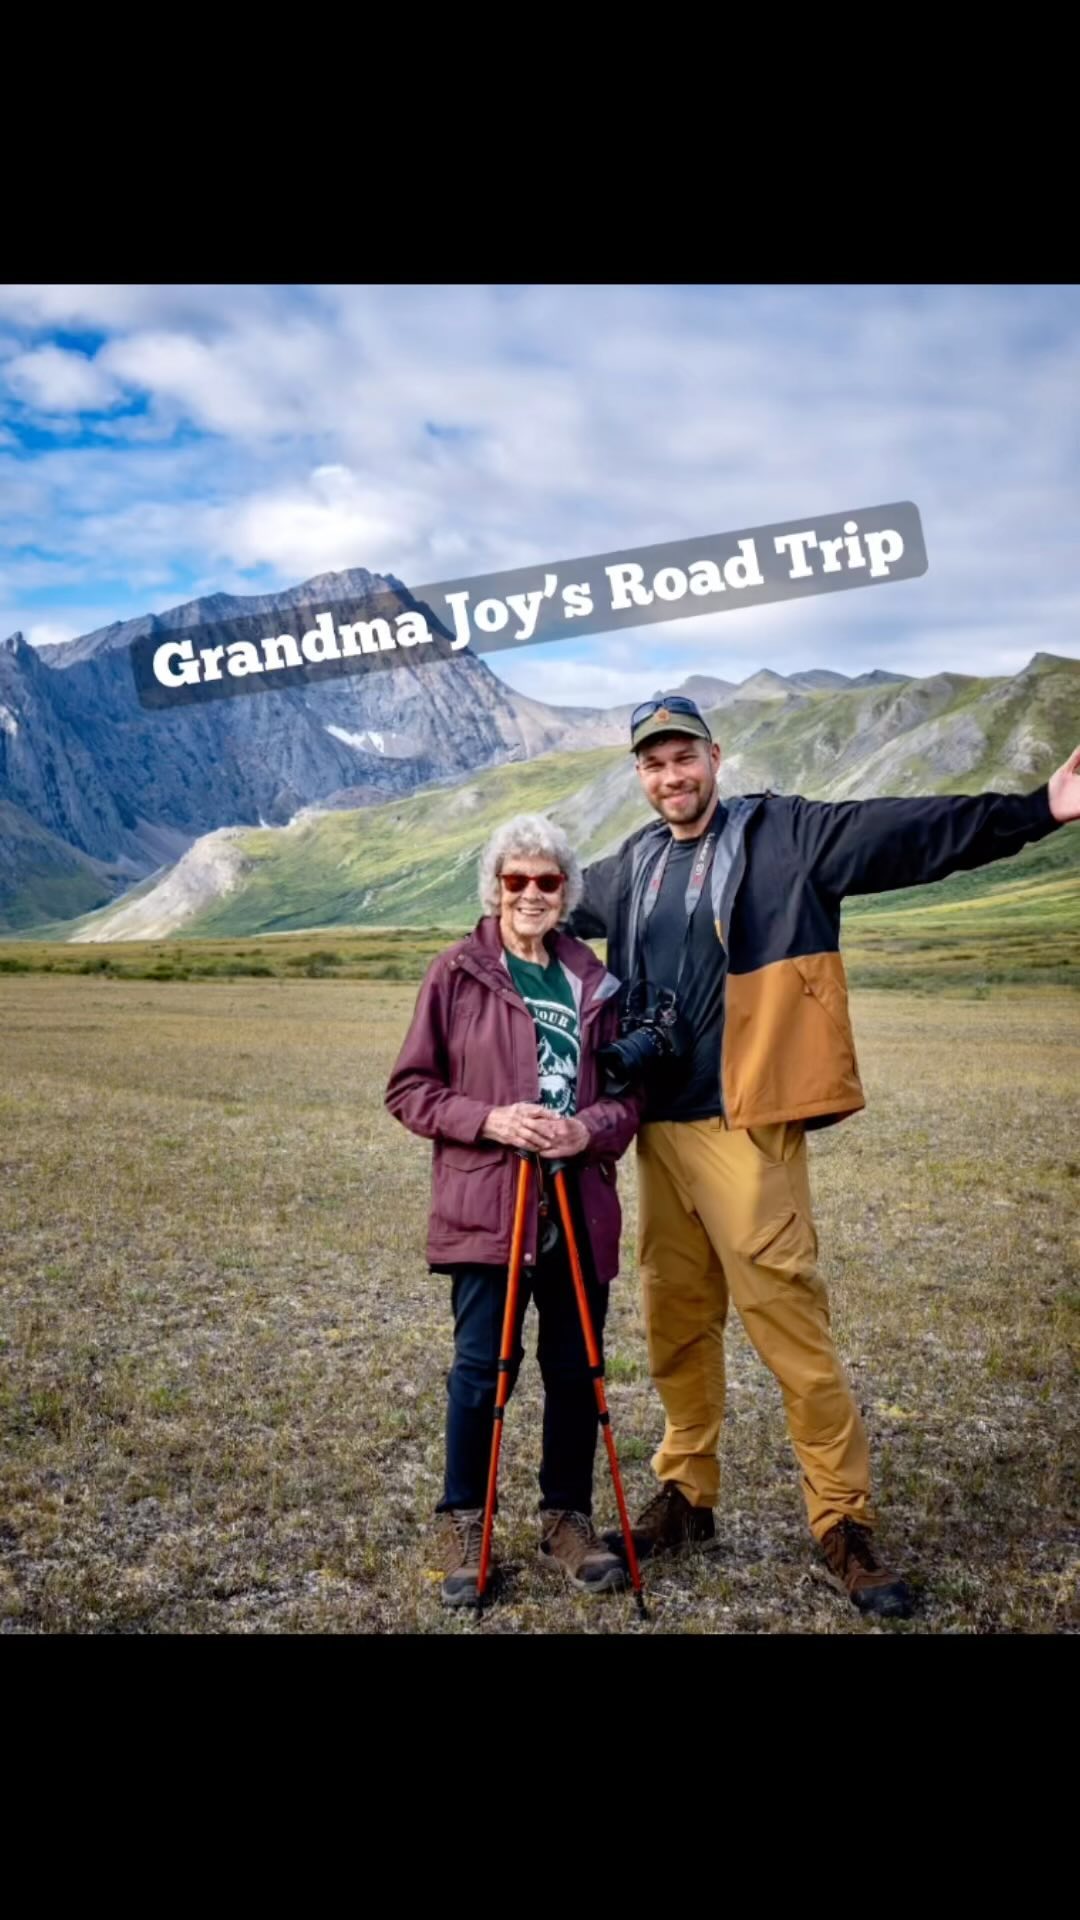 Brad Ryan and his Grandma Joy have been on a 7-year quest to visit all 63 national parks, with only one park left to see: American Samoa. Their quest has become national news because it’s not just a remarkable story of adventure, it’s about the bond between a grandmother and her grandson, and how they have “found joy” across the roads and wilderness of America.

In today’s very special episode of the Dear Bob and Sue Podcast we had the chance to talk with them about their inspiring journey, and find out how Grandma Joy, at the age of 92, has been able to climb mountains, whitewater raft and zip line for the first time in her life. The answer, as you might guess on this Thanksgiving Day, comes down to gratitude. 

@grandmajoysroadtrip